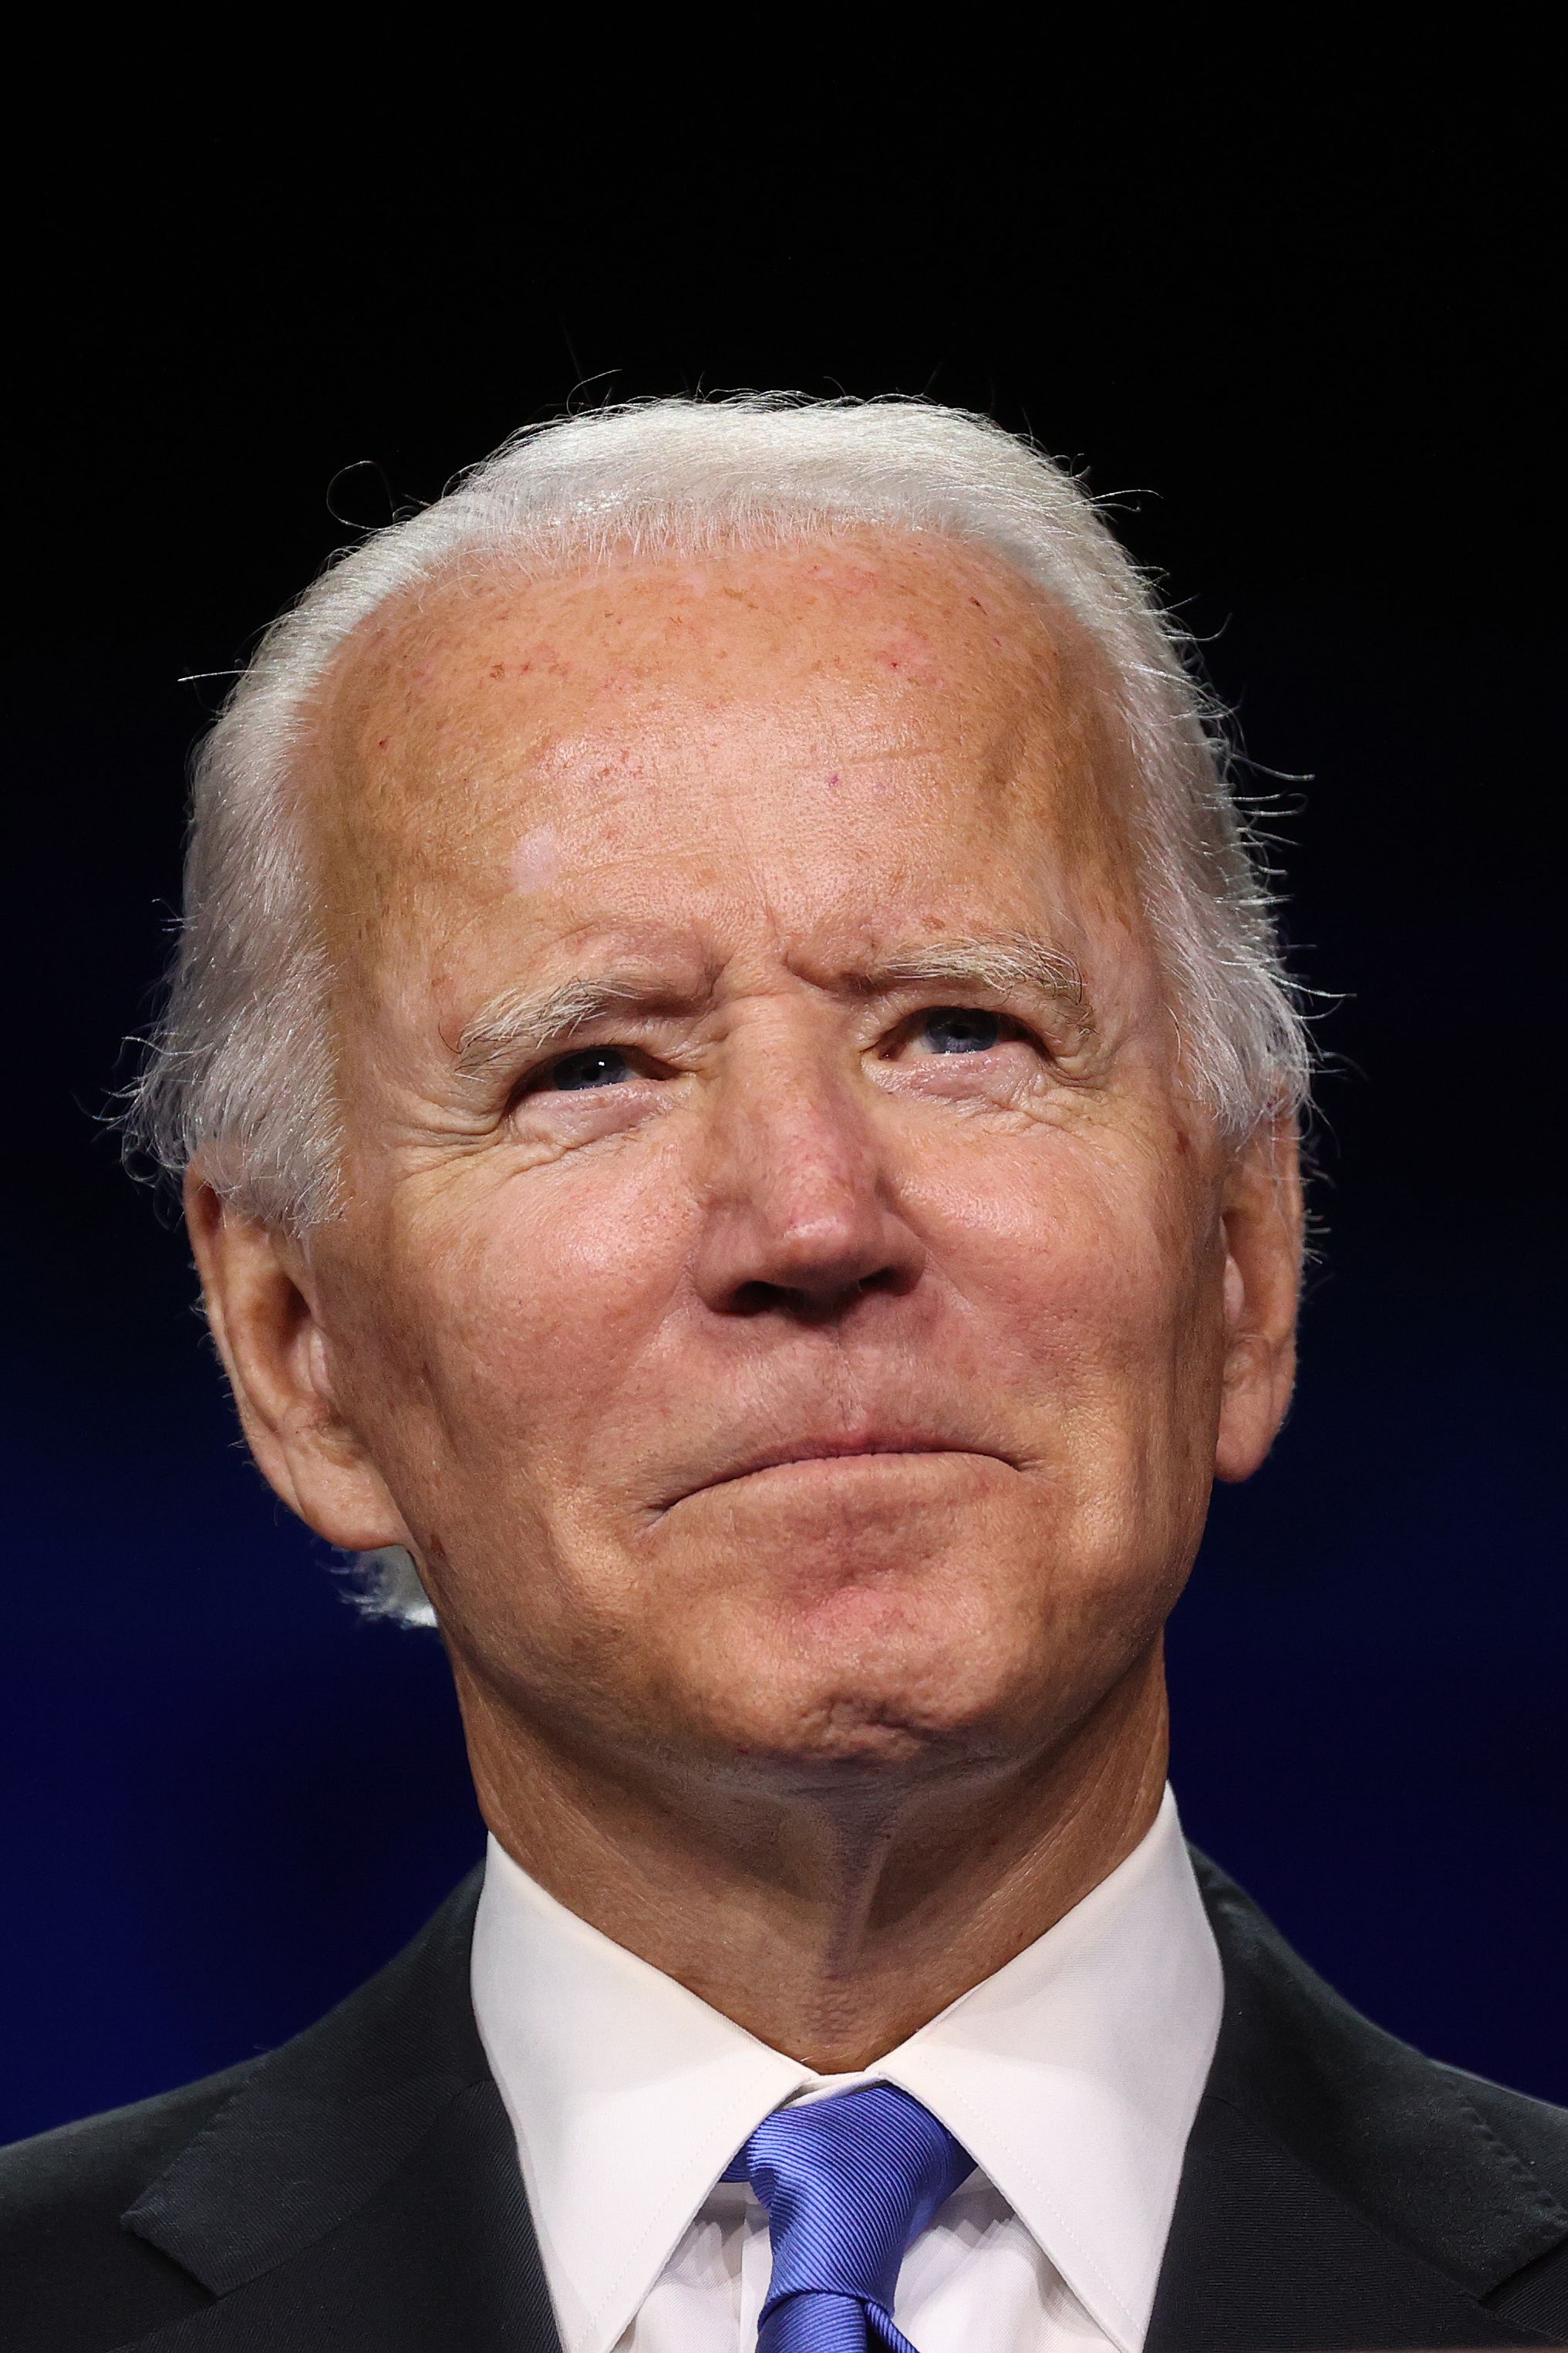 Smerconish: This teenager may Joe Biden from future attacks on his mental faculties